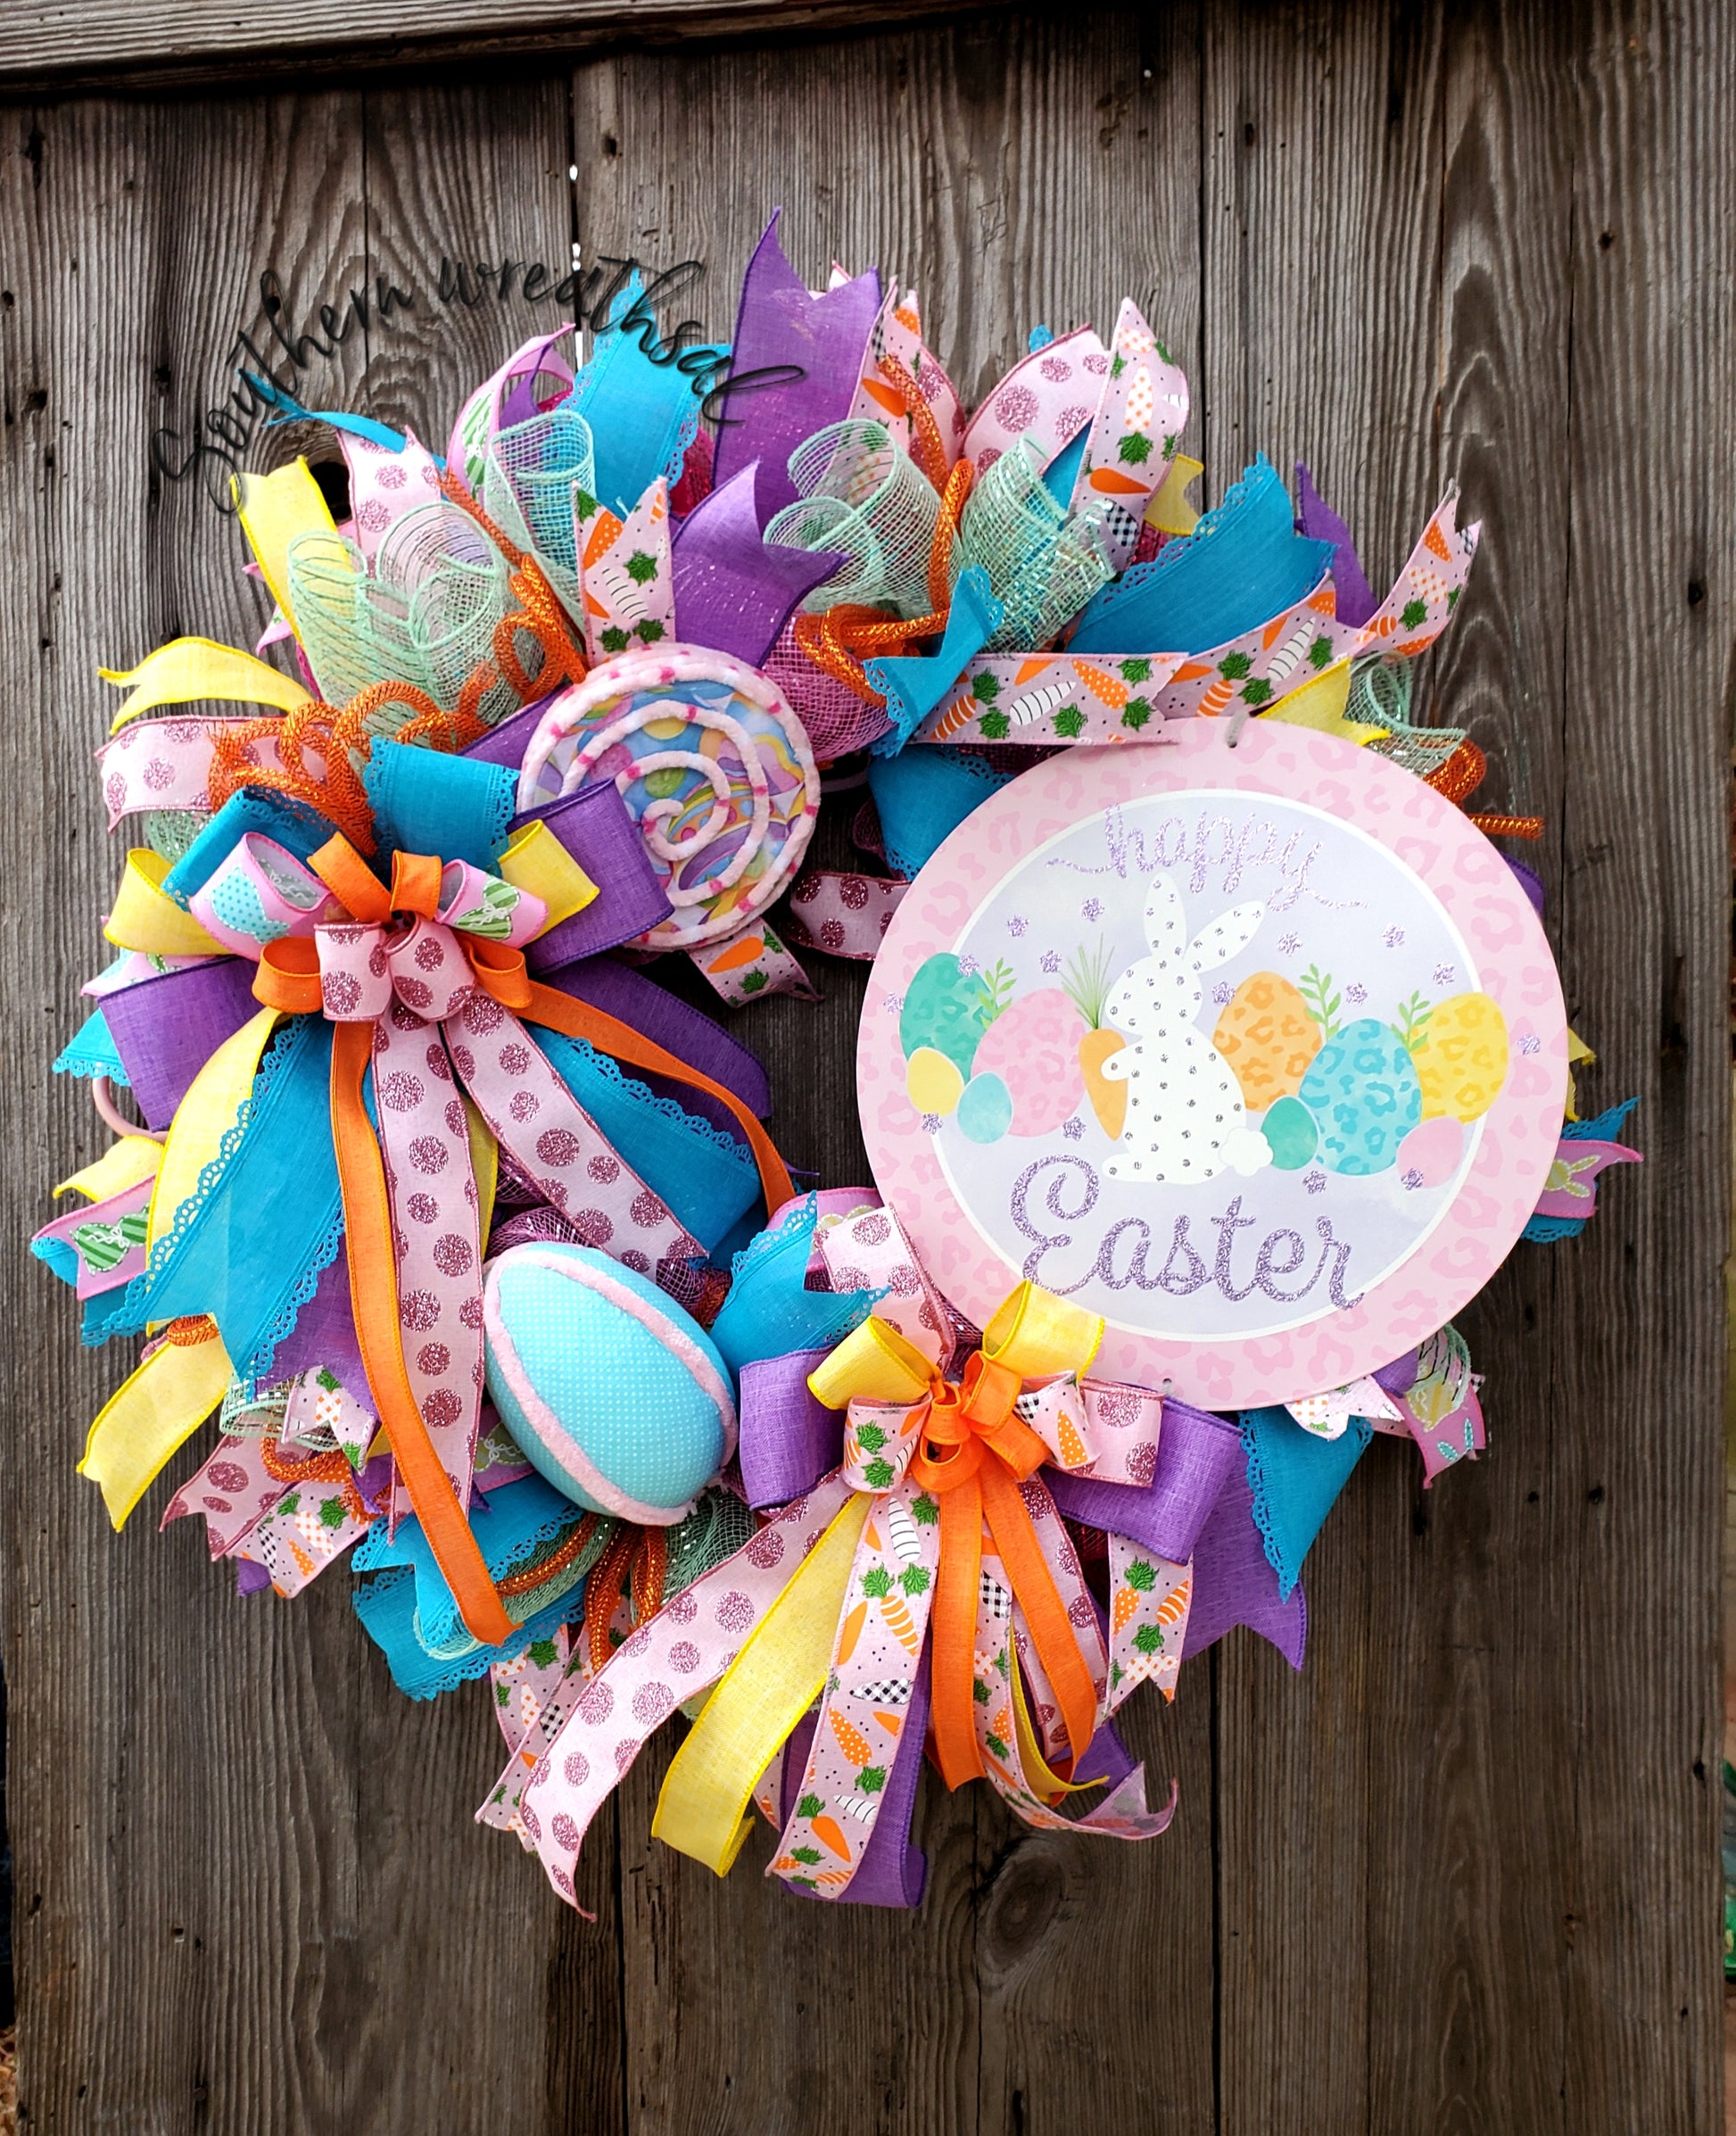 Happy Easter for wreath